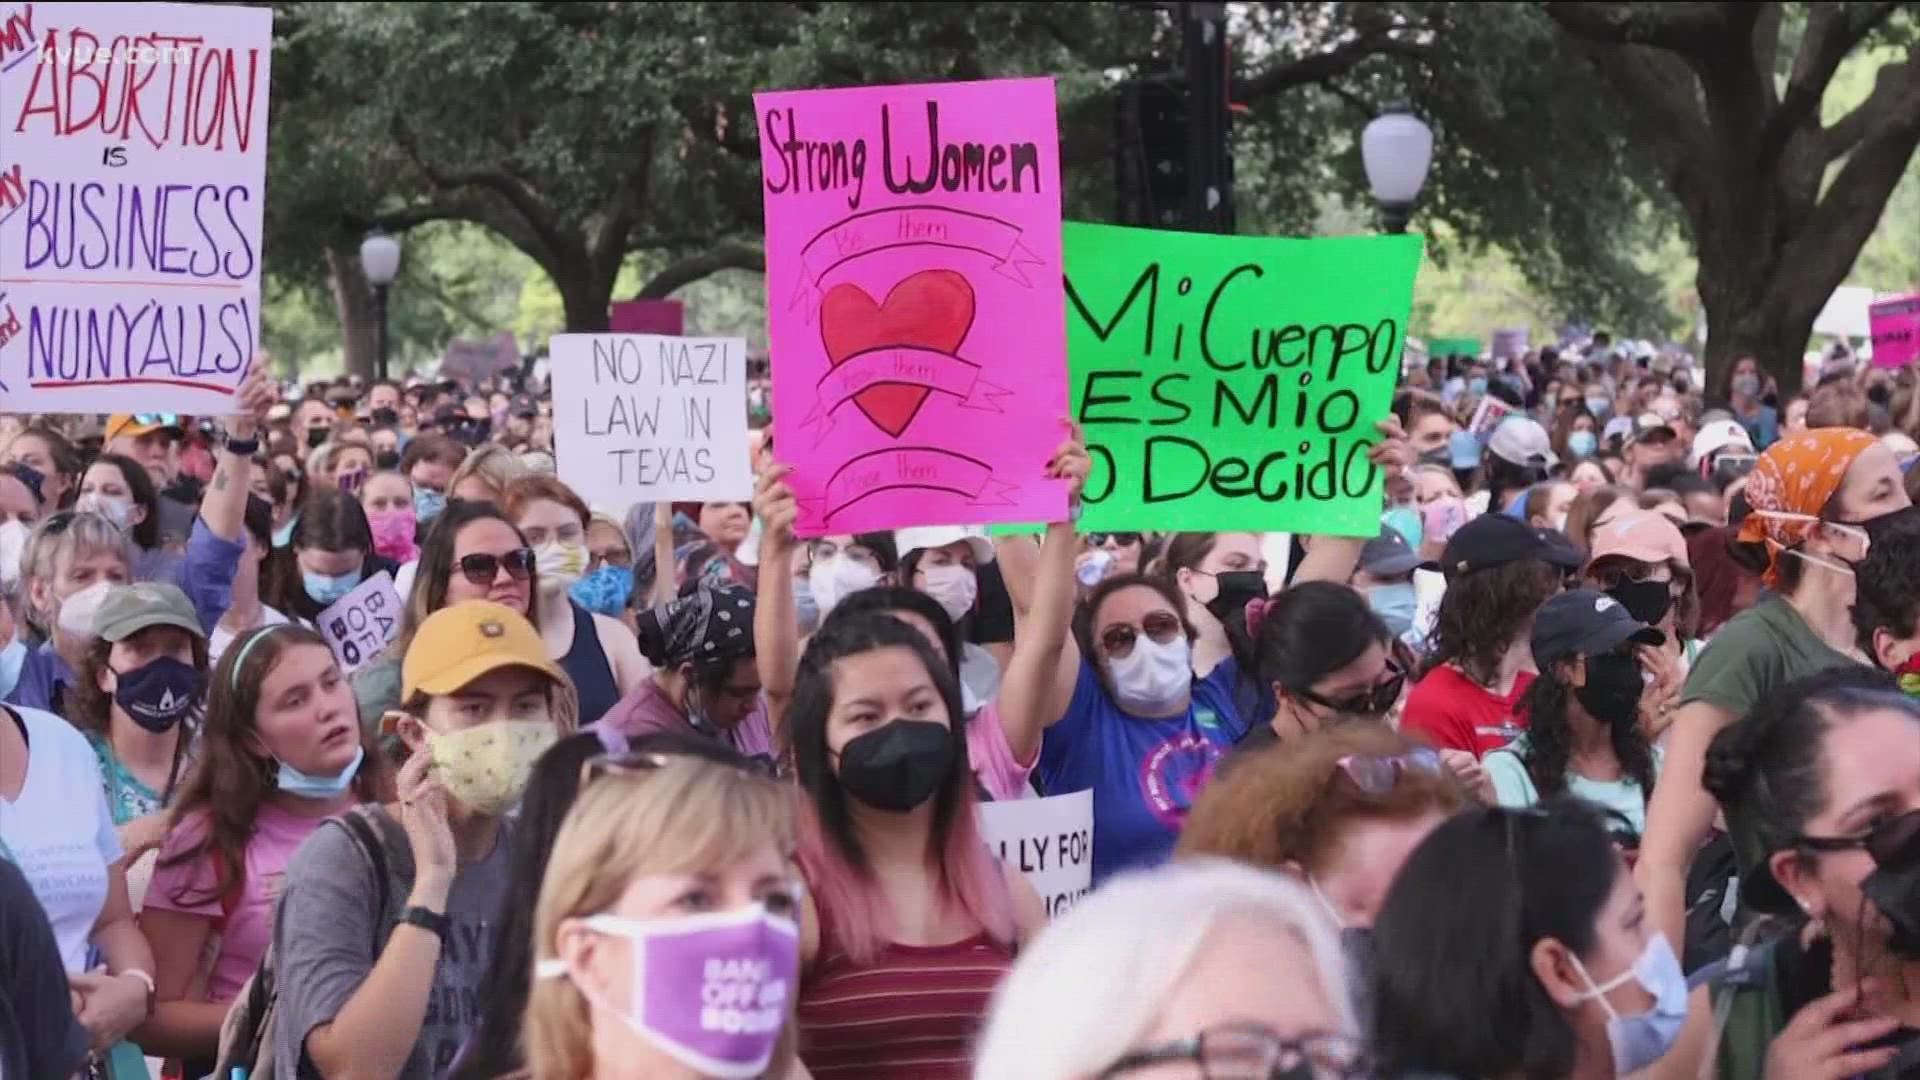 Thousands of people marched in rallies across the country to protect "Roe v. Wade." Rallies were held in all 50 states, including one at the Texas State Capitol.